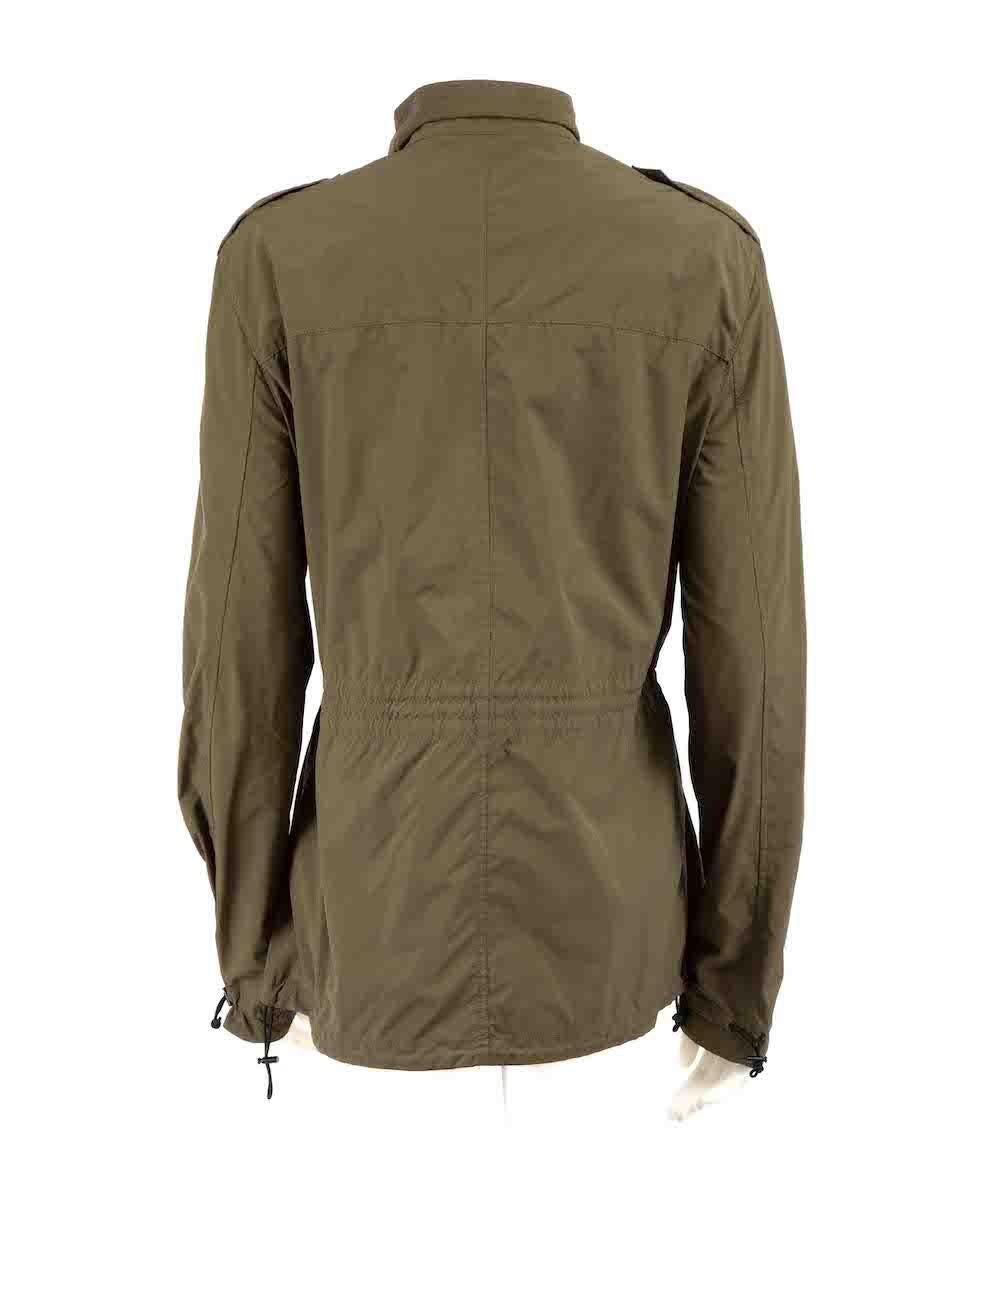 Tom Ford Khaki Windbreaker Utility Jacket Size XL In Good Condition For Sale In London, GB